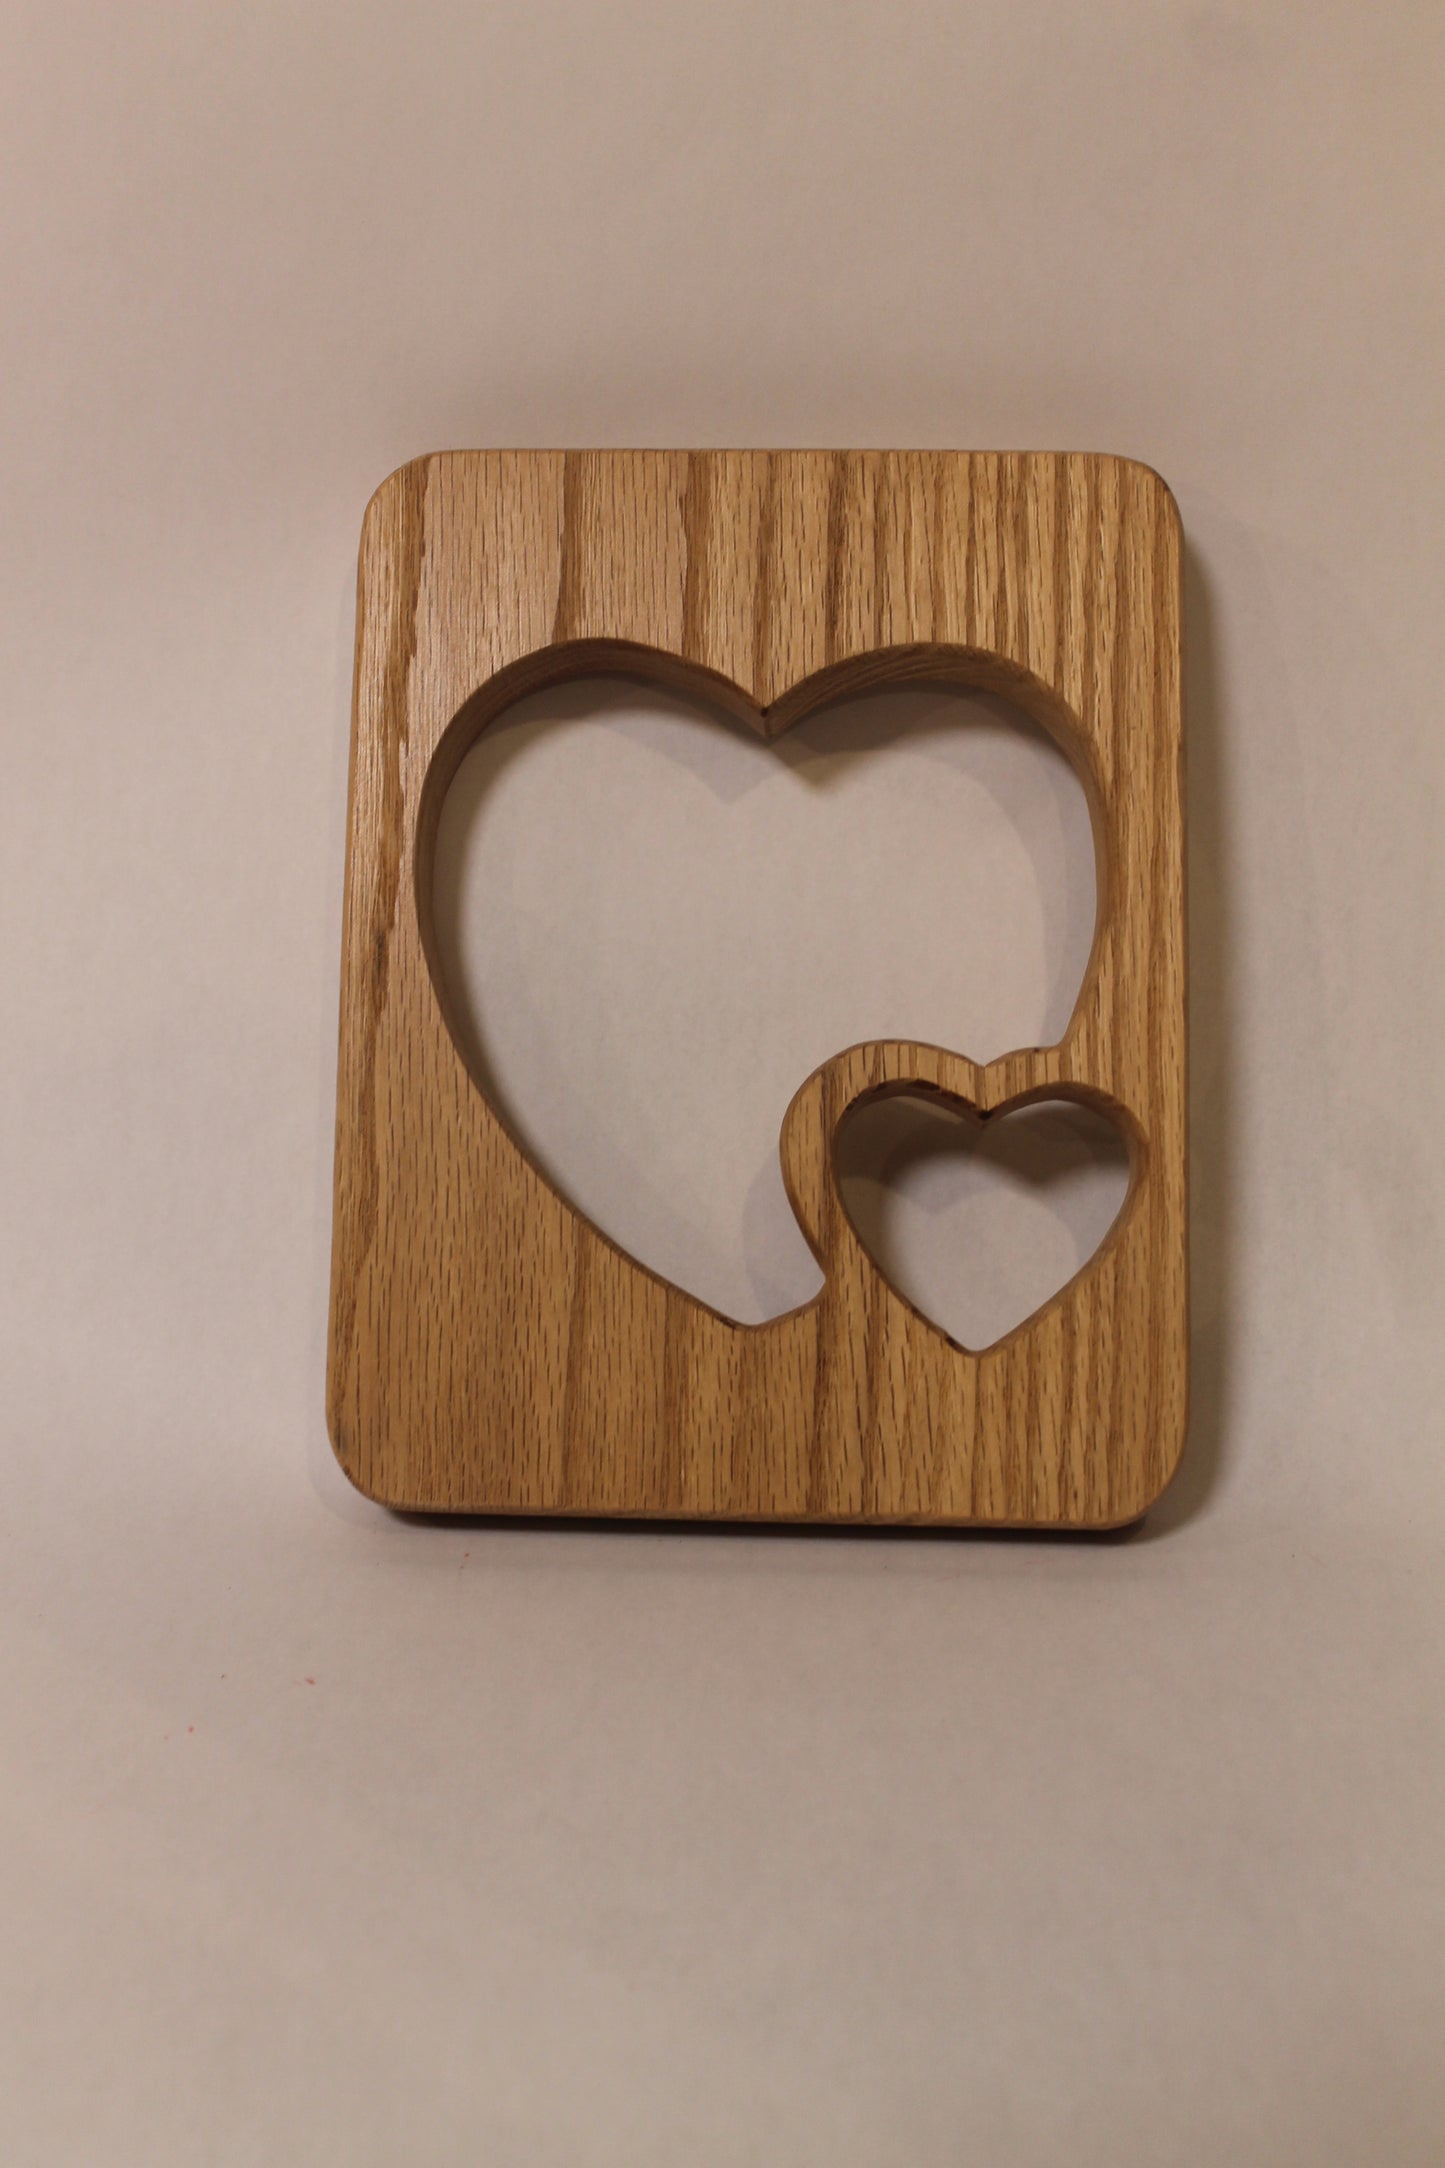 Double heart wall hanging decoration handcrafted from oak